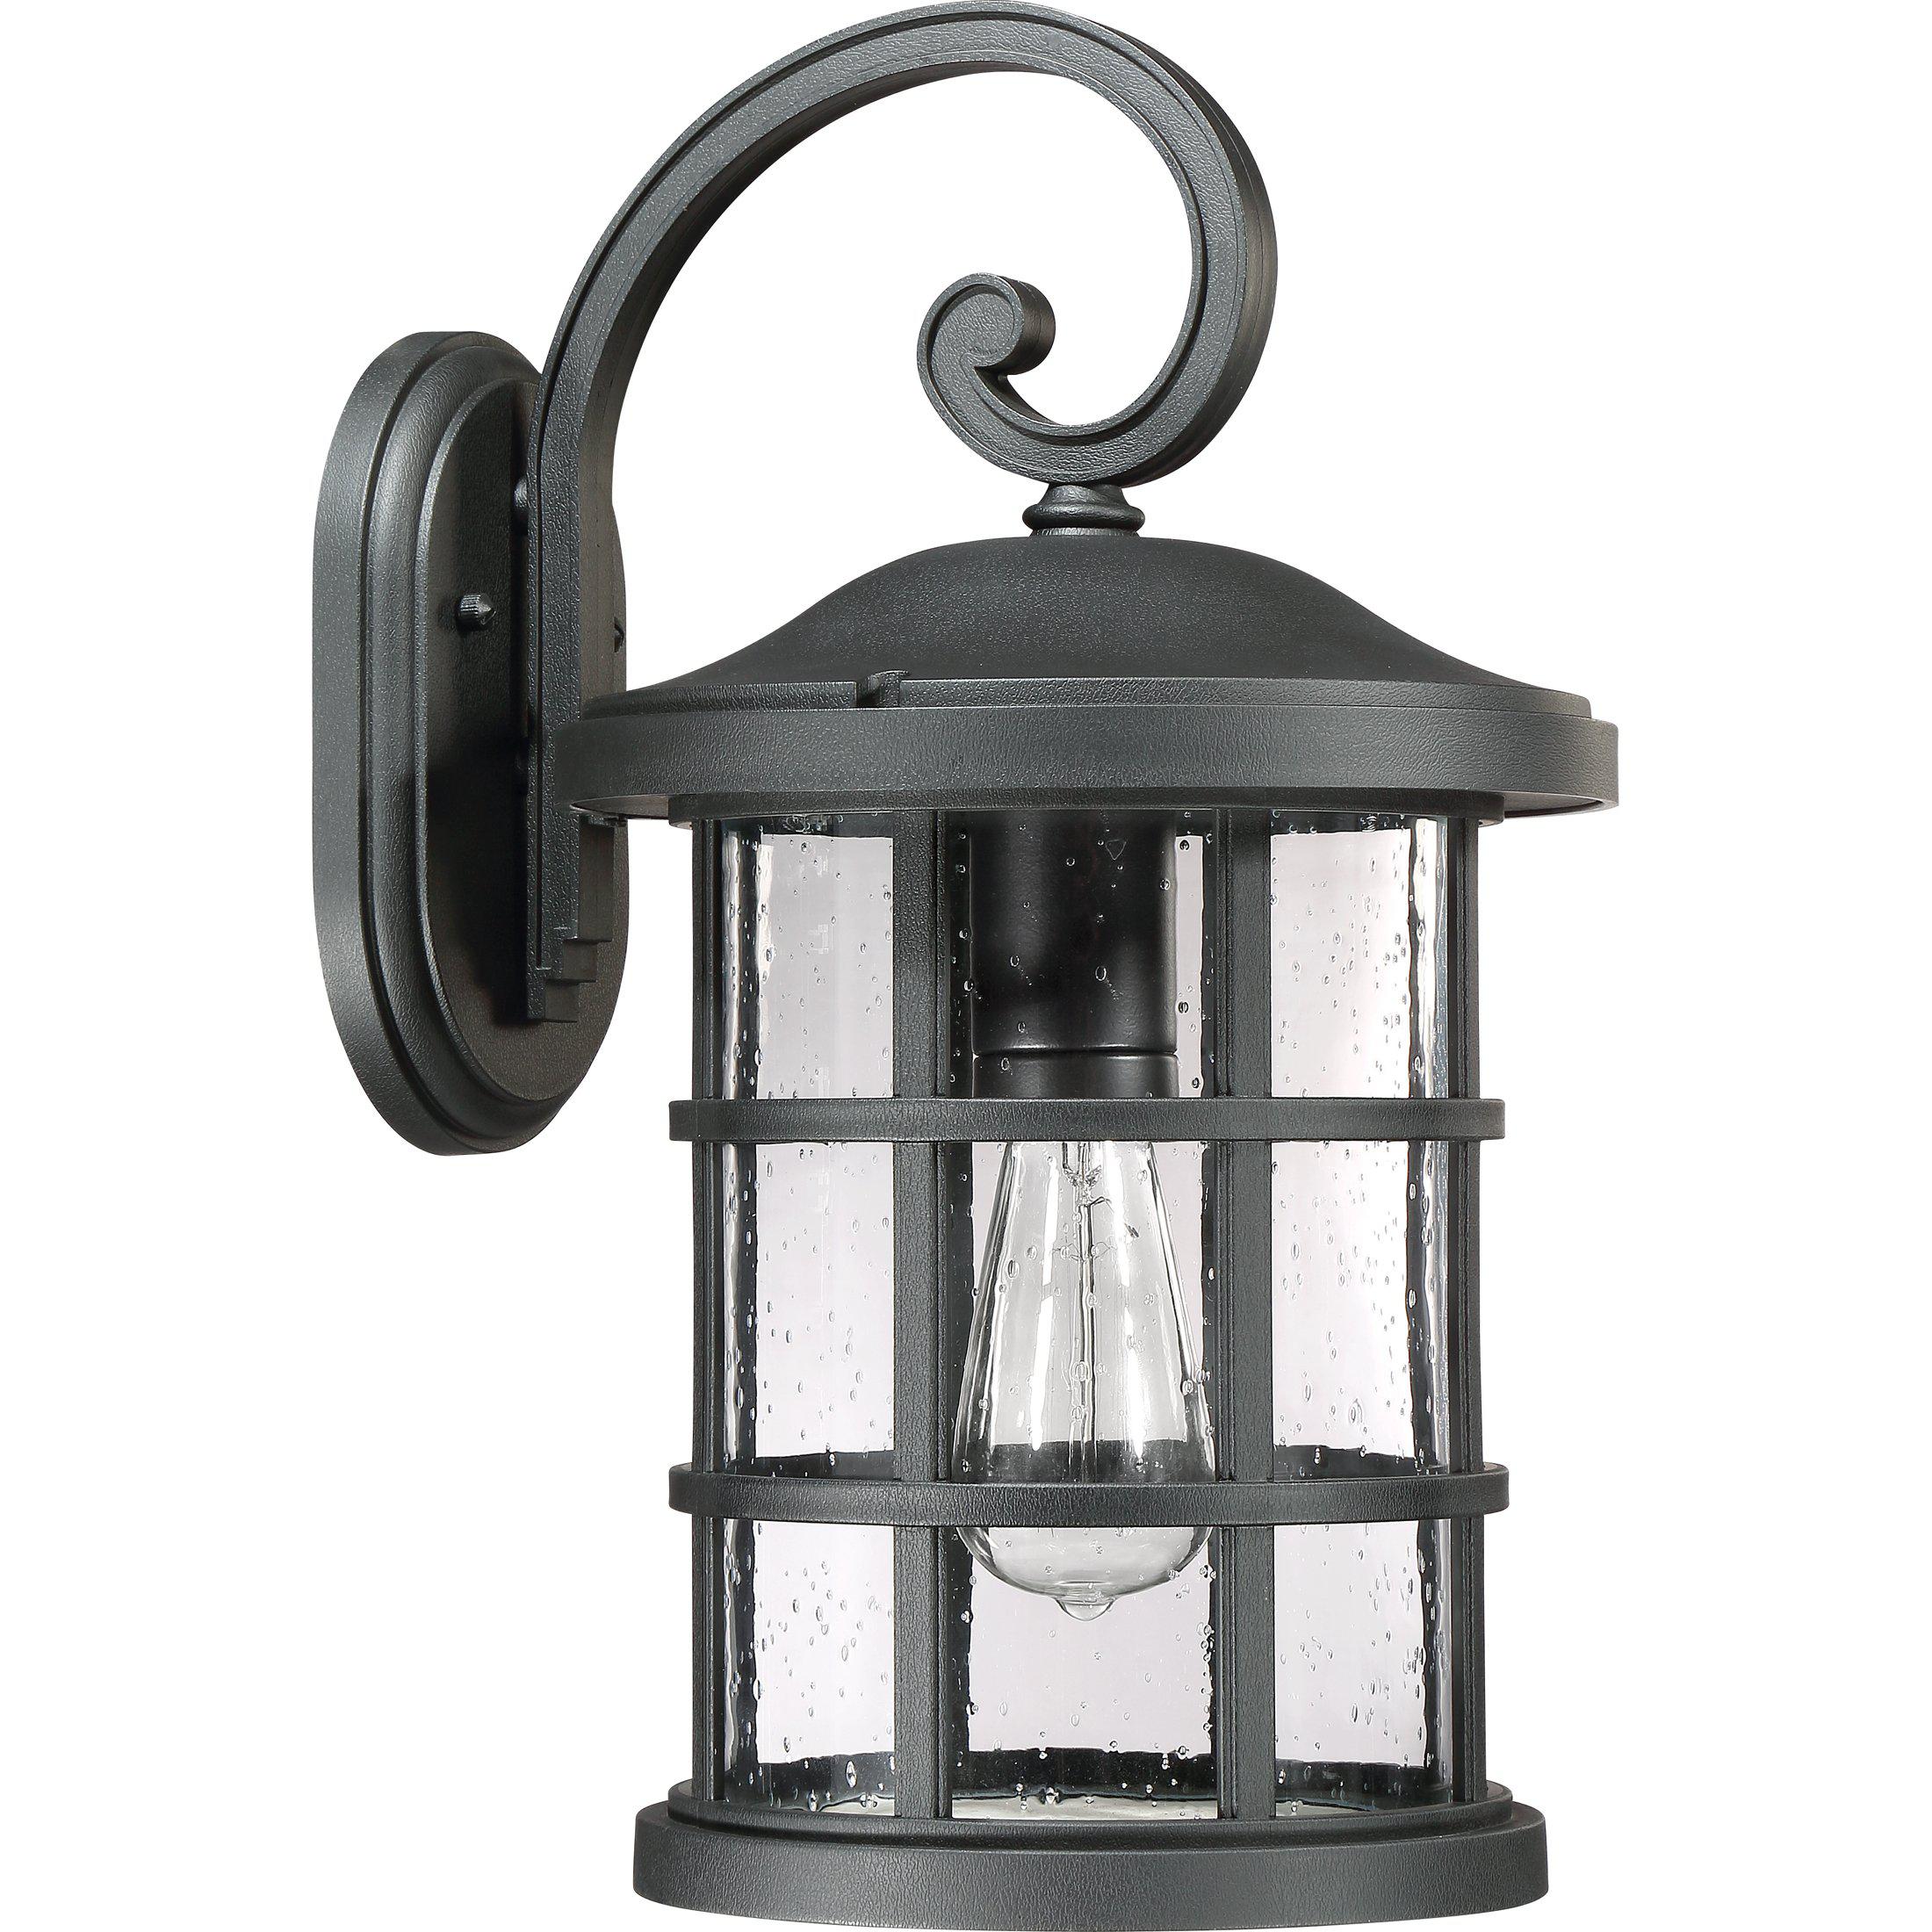 Quoizel  Crusade Outdoor Lantern, Large Outdoor l Wall Quoizel   